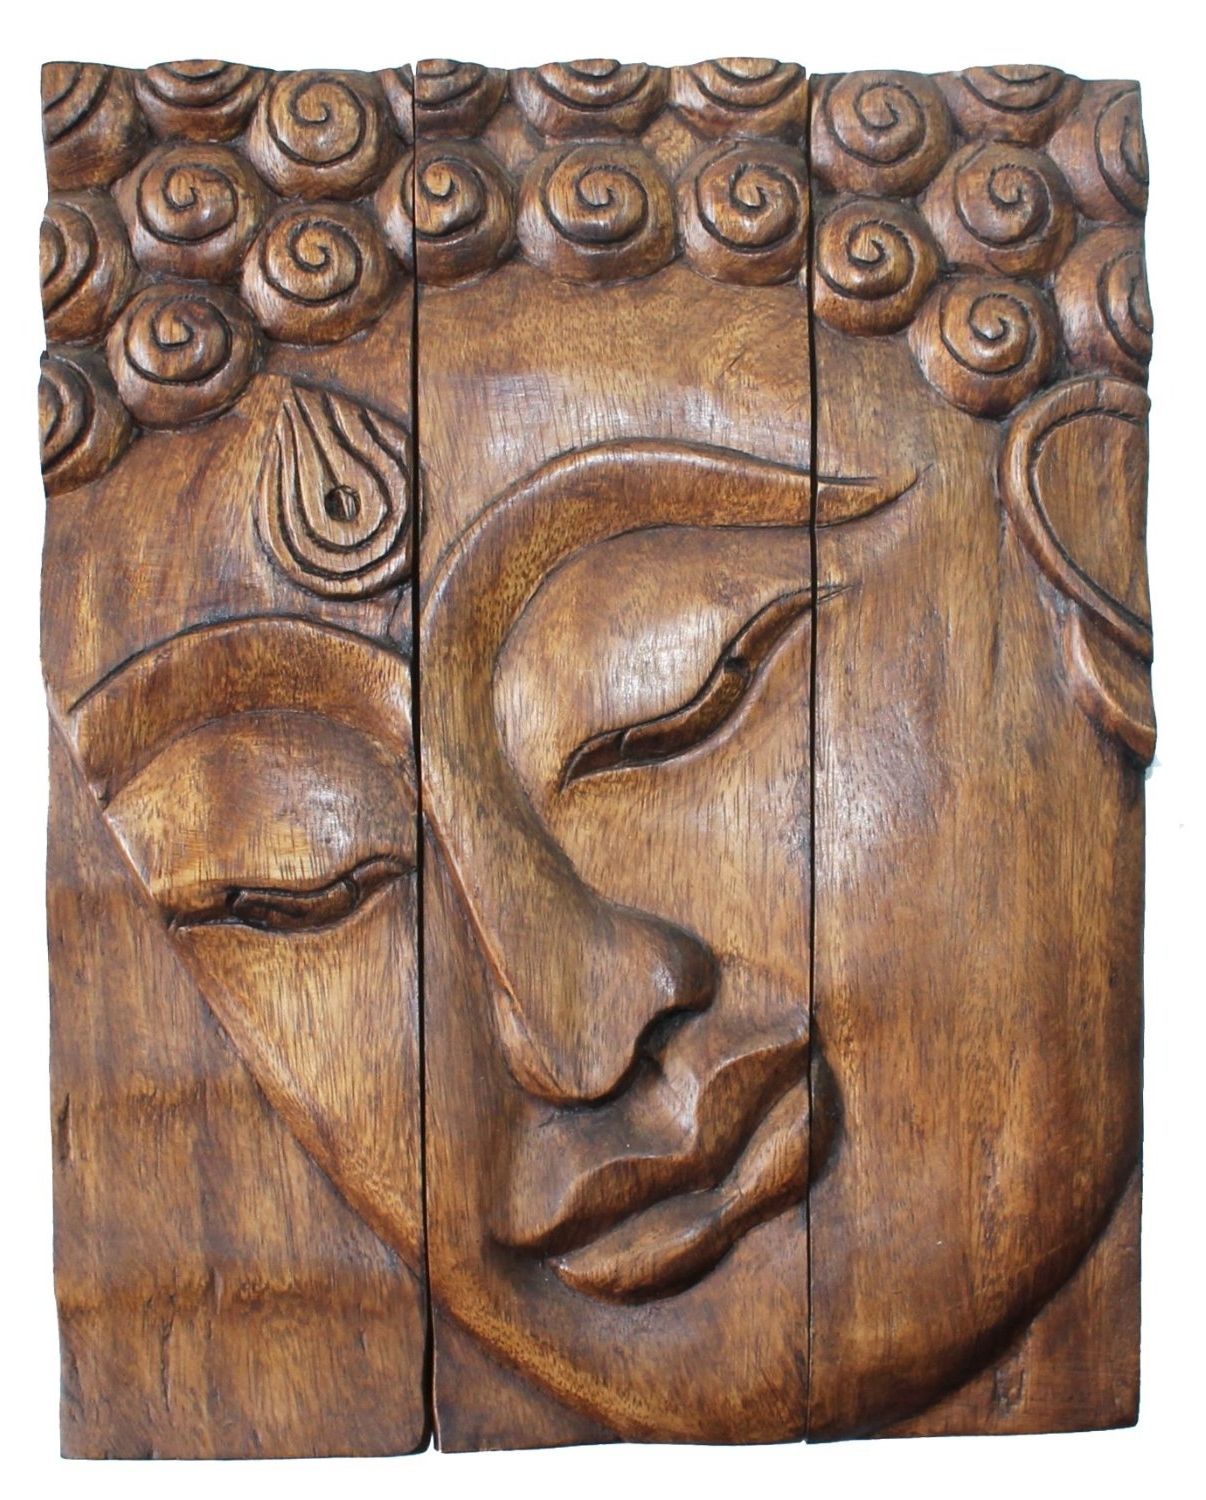 Well Known Buddha Wood Wall Art With Cheap Wood Buddha Wall Art, Find Wood Buddha Wall Art Deals On (View 13 of 15)